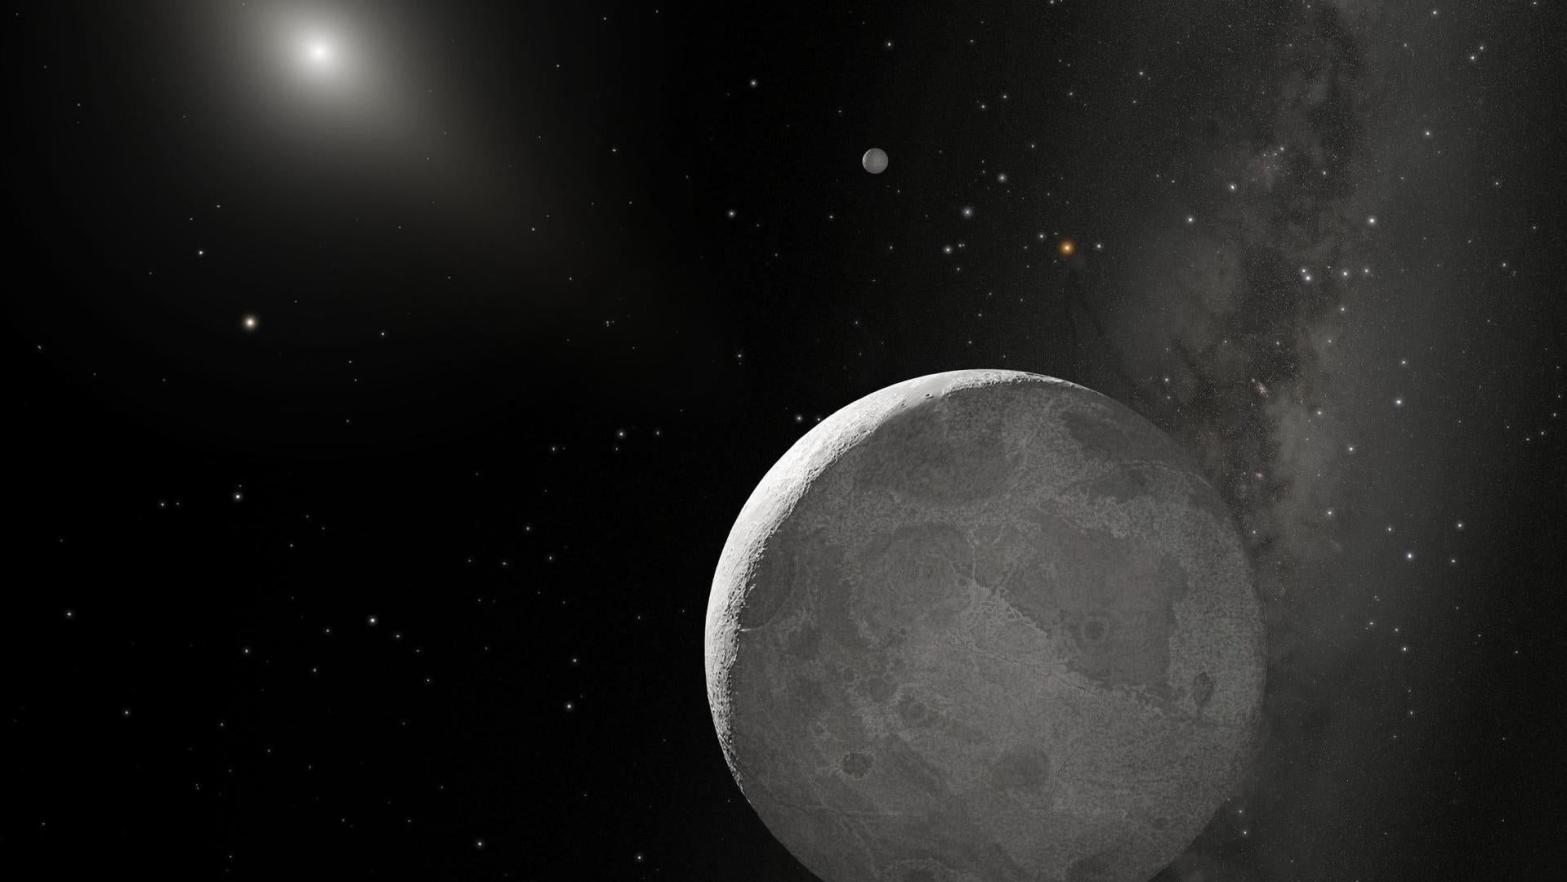 Pluto’s Neighborhood May Extend Billions of Miles Farther Into Space Than We Thought